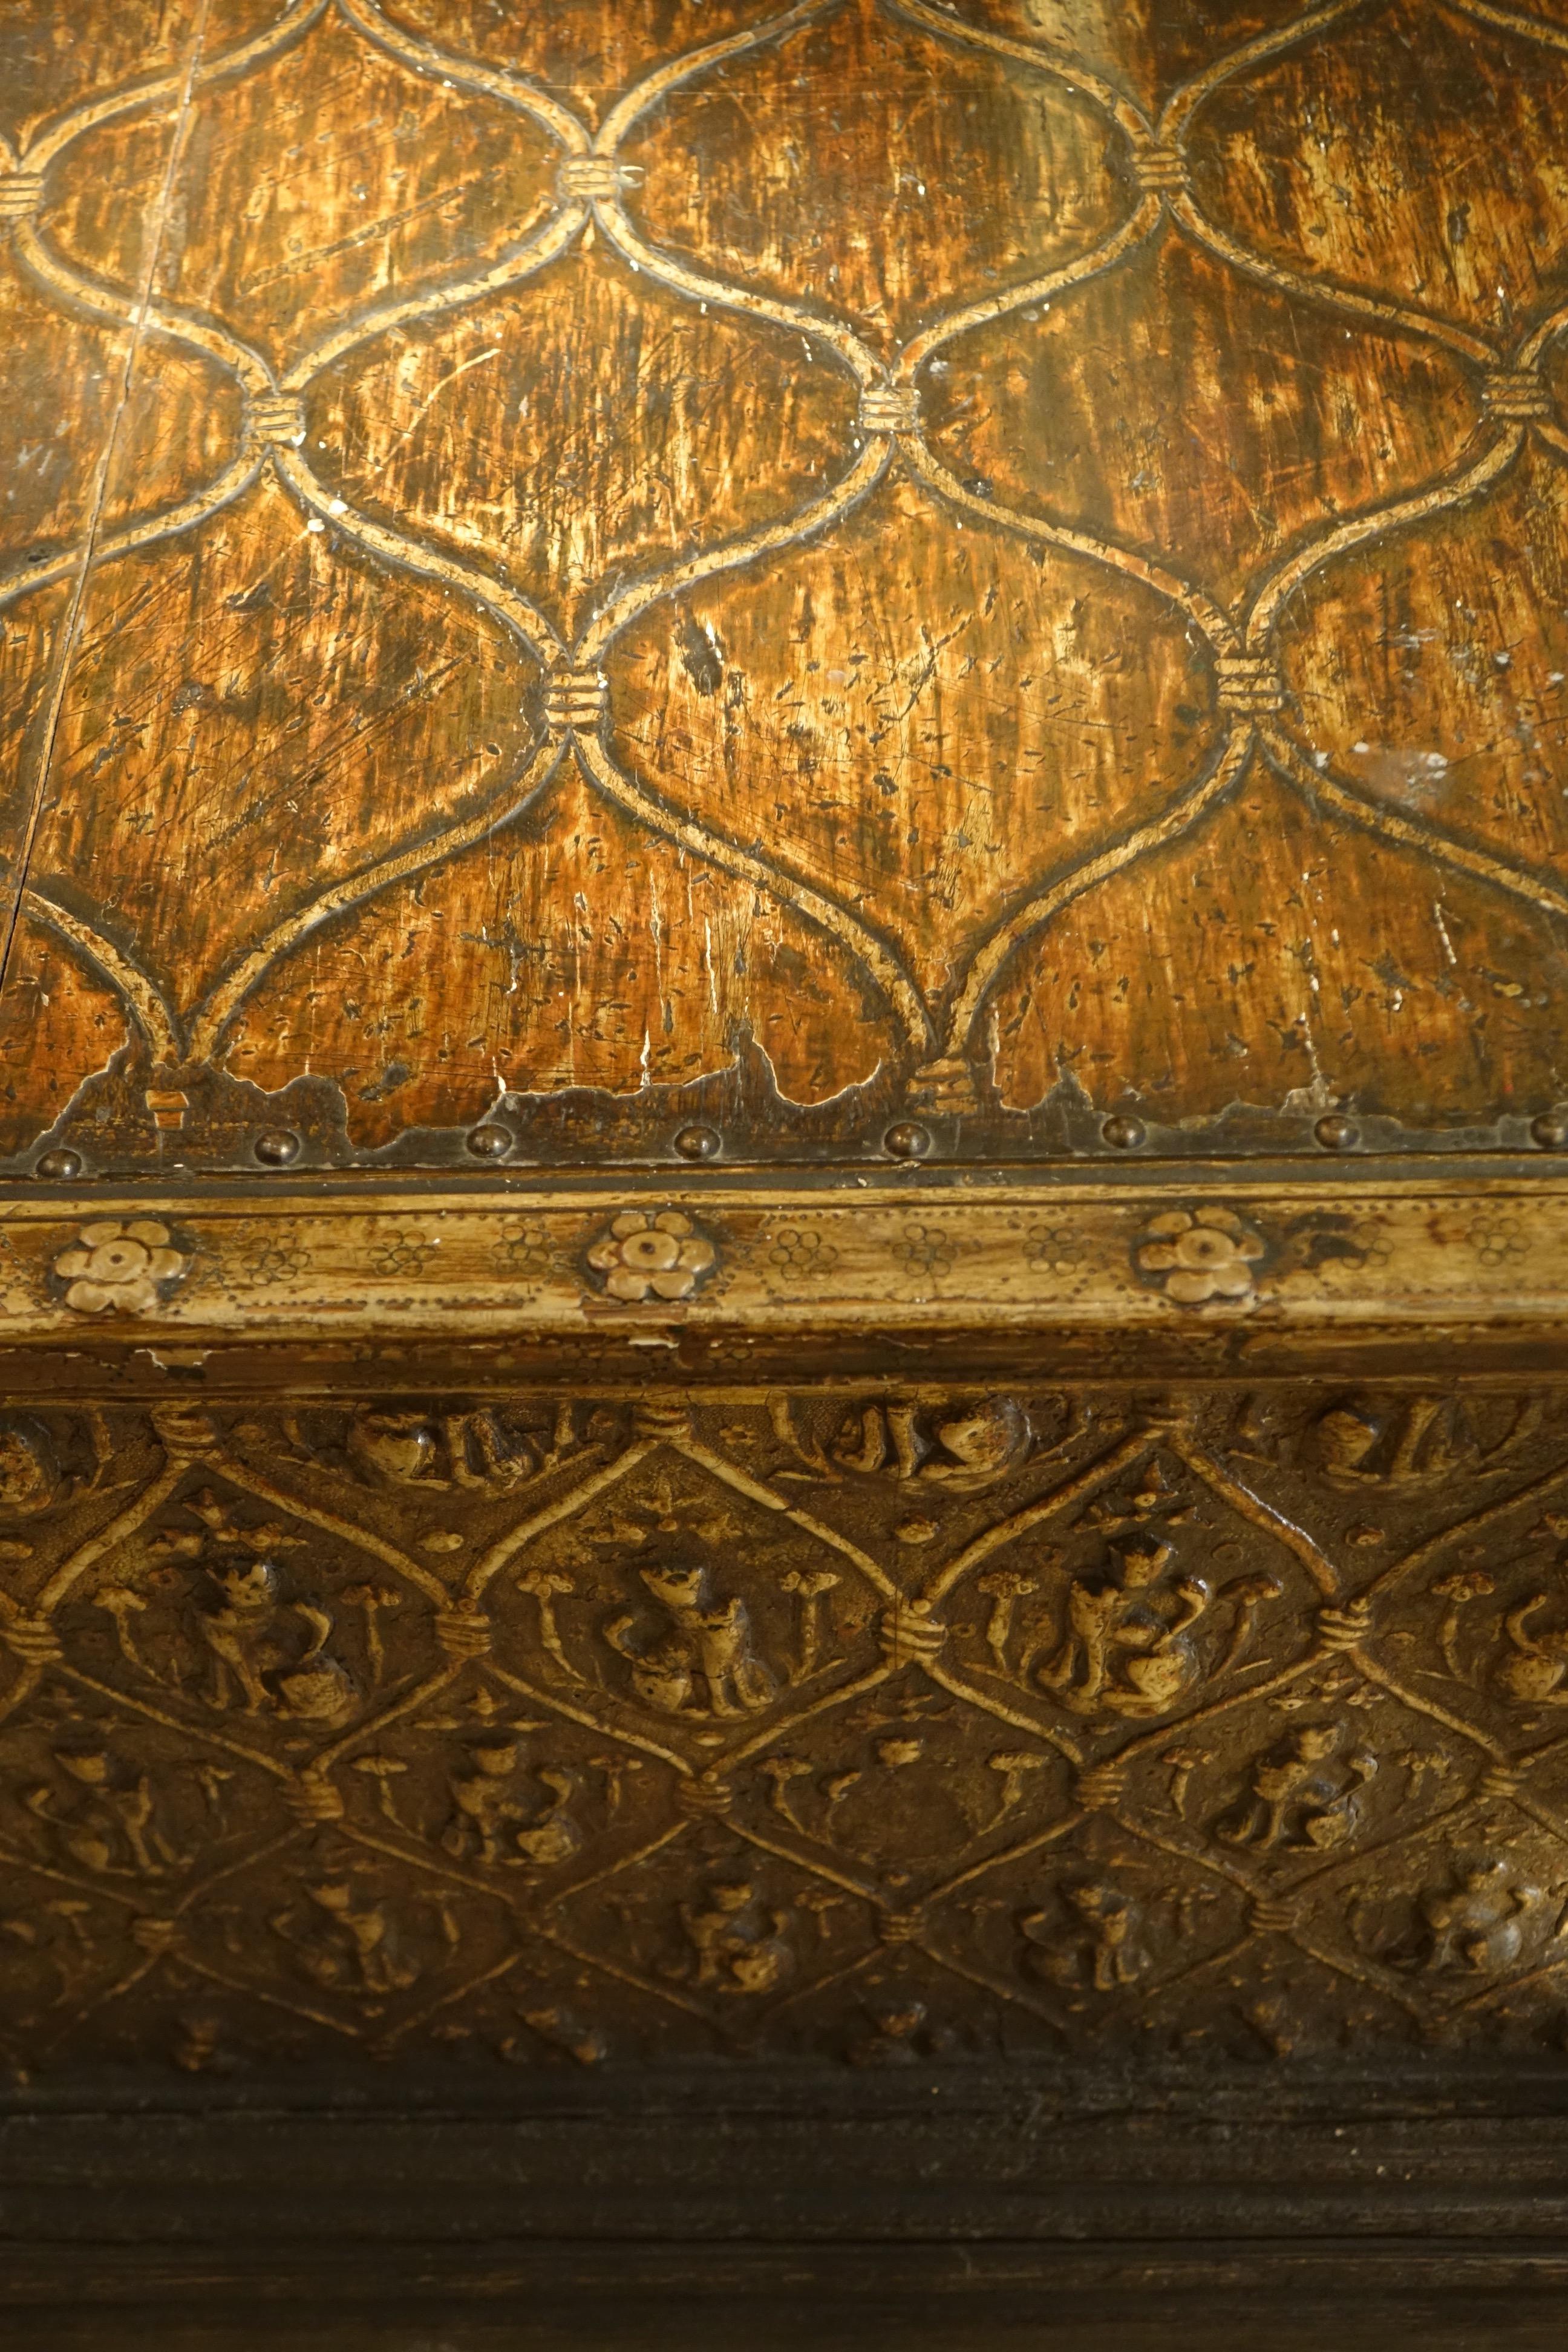 Renaissance Large 15th Century Wedding Cassone With Pastiglia Decoration, Florence Italy For Sale